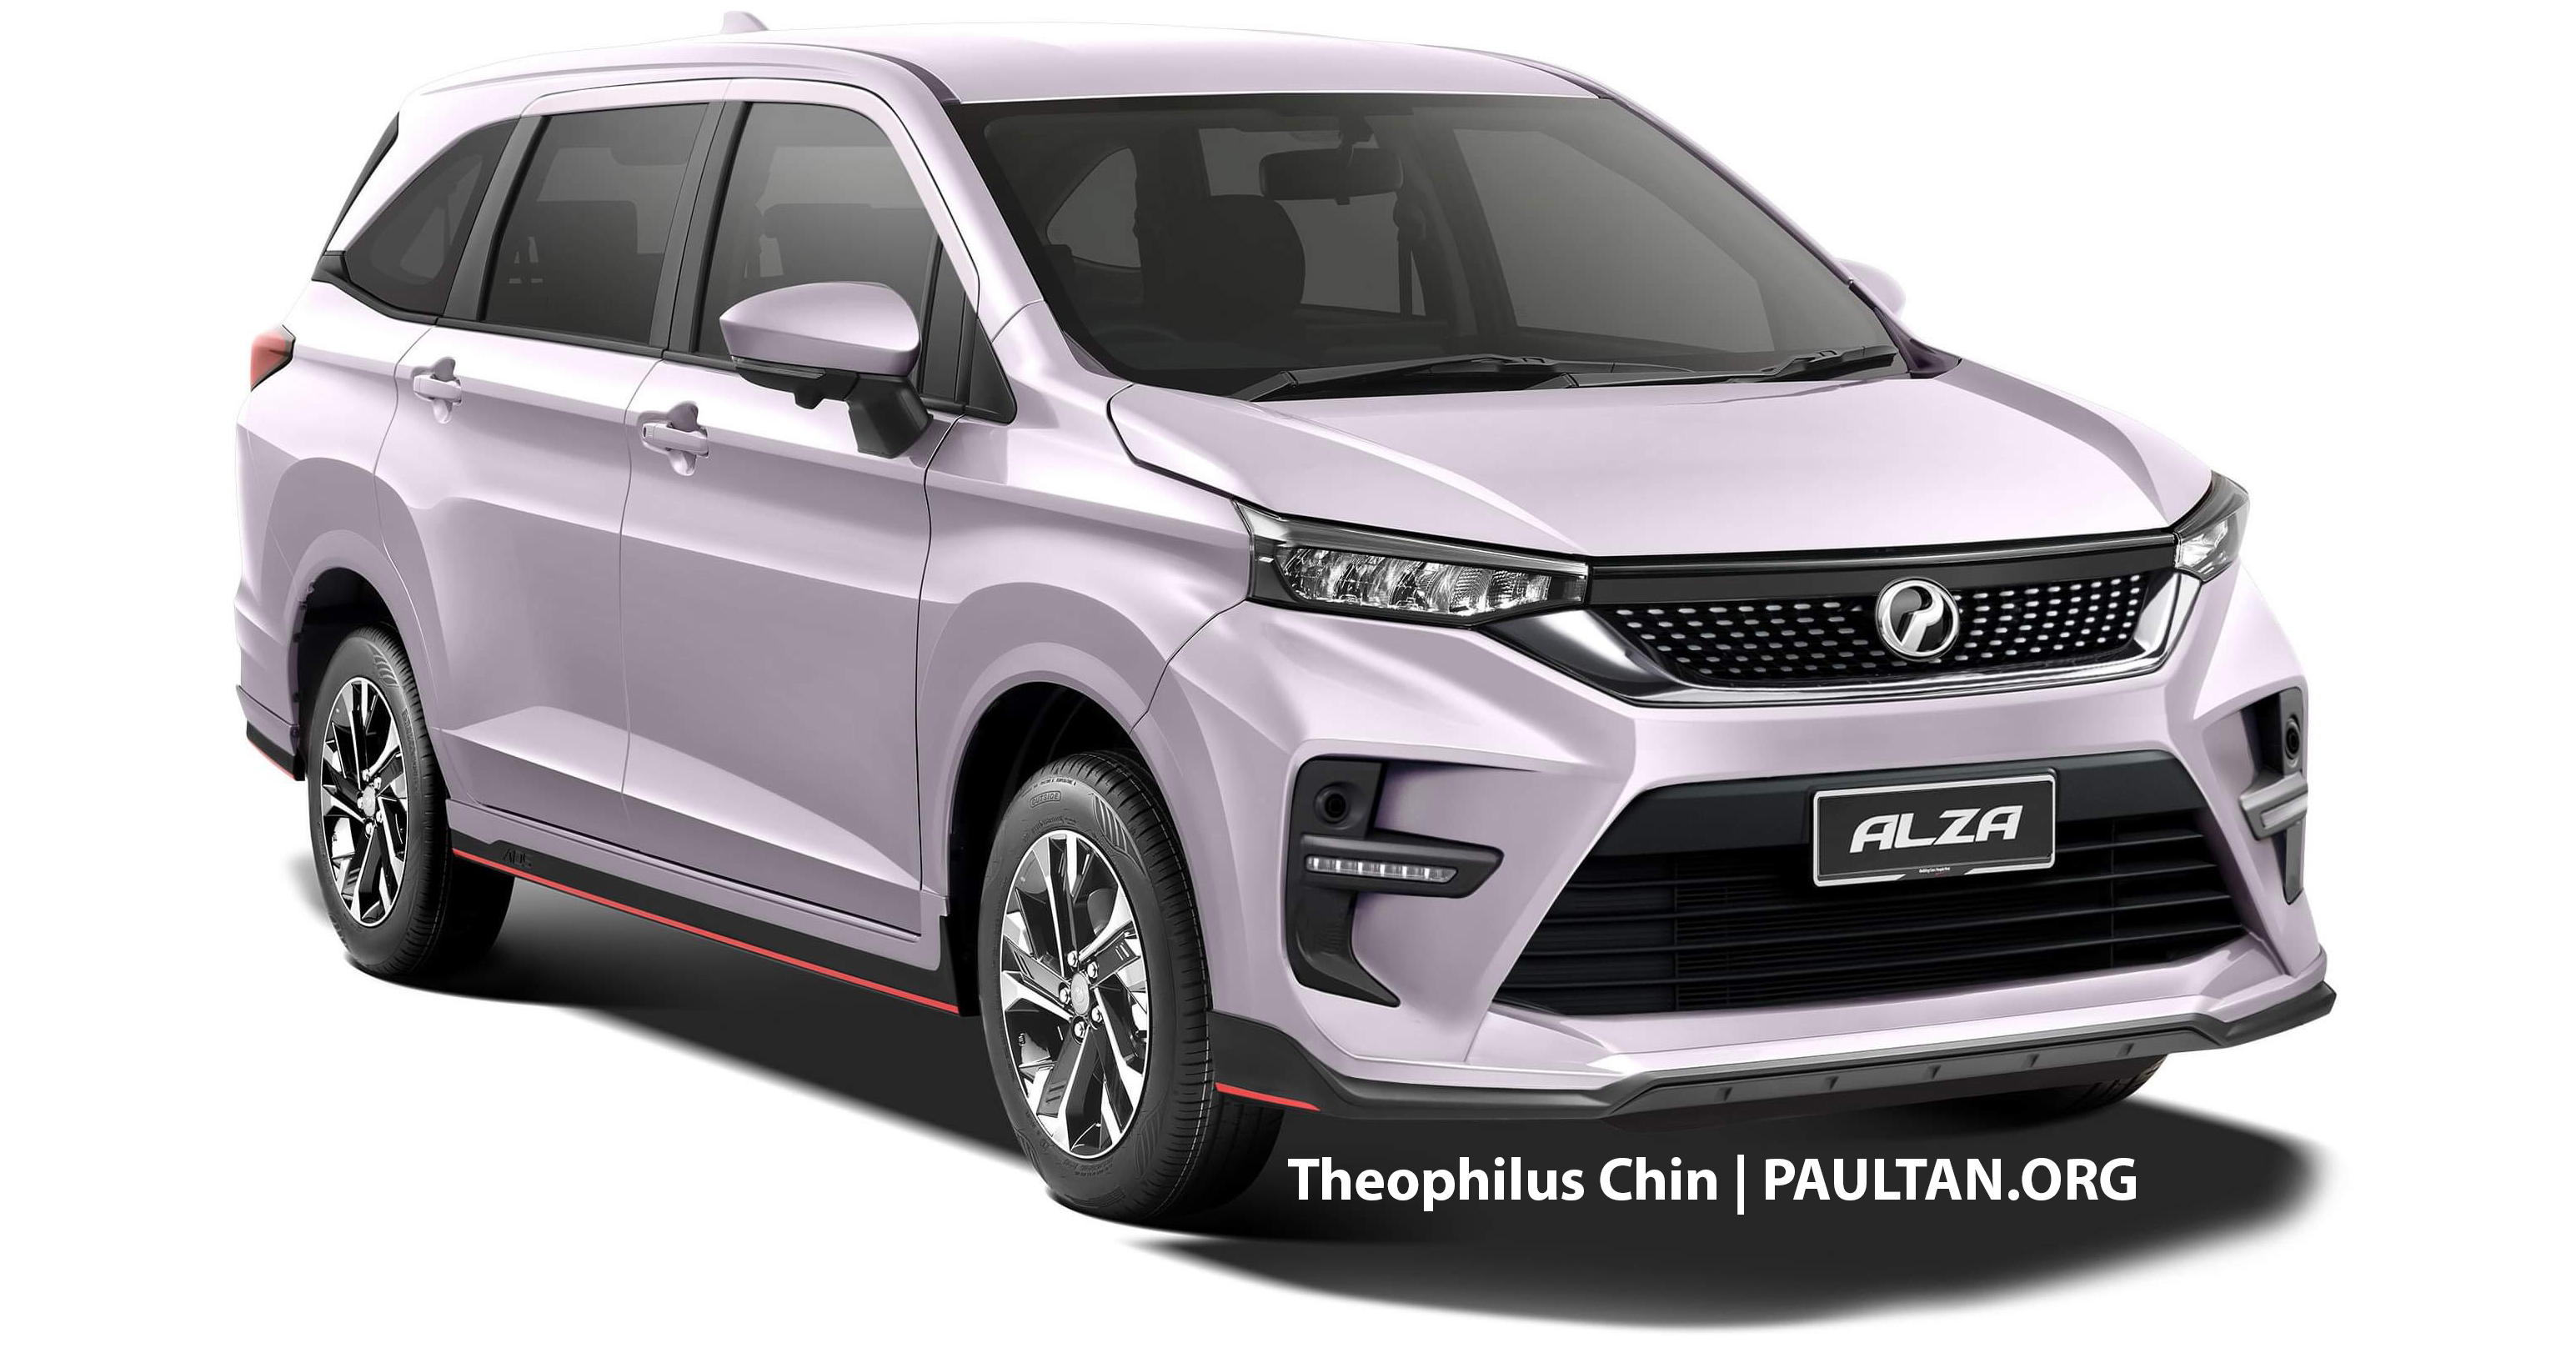 2022 Perodua Alza D27a Open For Booking 3 Variants Launching In June Estimated Price From Rm69k Paultan Org